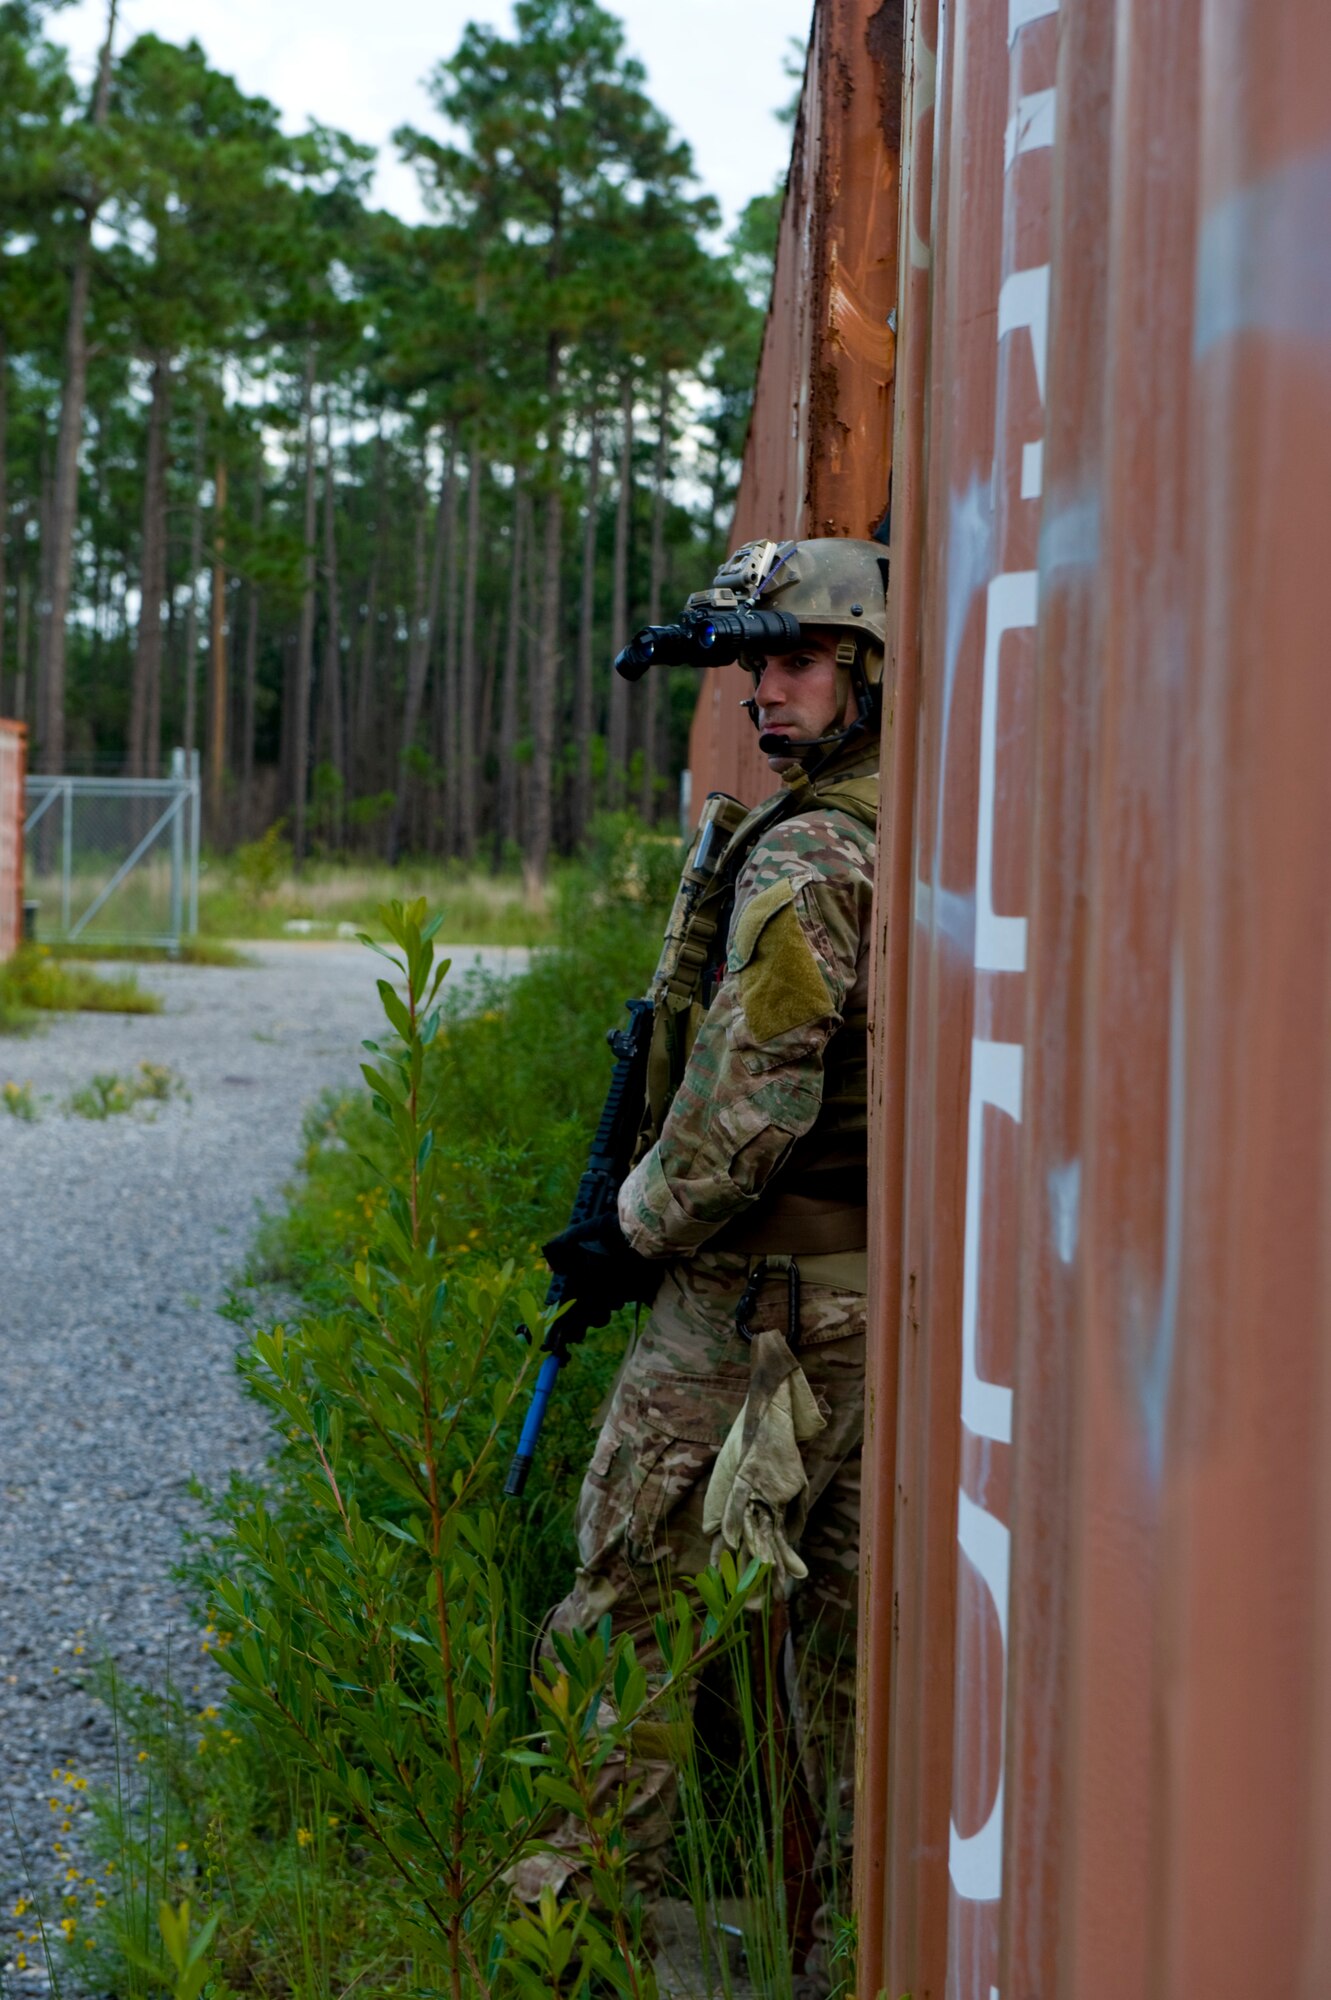 A U.S. Air Force pararescueman with 23rd Special Tactics Squadron provides cover from between two rail cars during a simulated improvised explosive device training exercise on Eglin Range, Fla., Aug. 21, 2012.  He provided cover for an evacuation team transporting a simulated combat casualty. (U.S. Air Force Photo/Staff Sgt. John Bainter)
